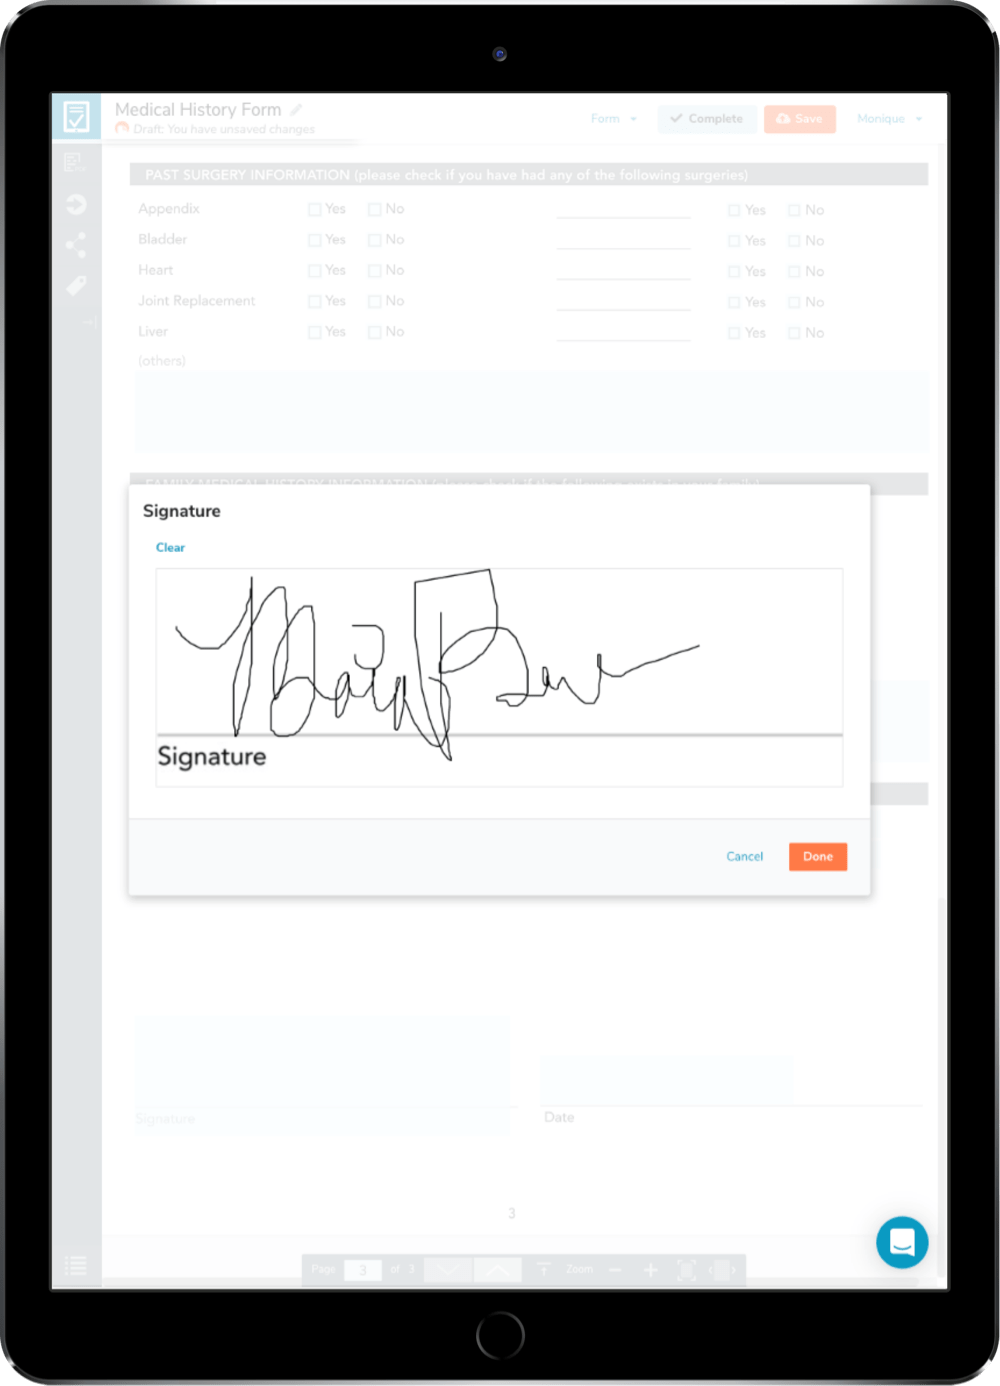 An electronic signature being applied to a digital form on a tablet.